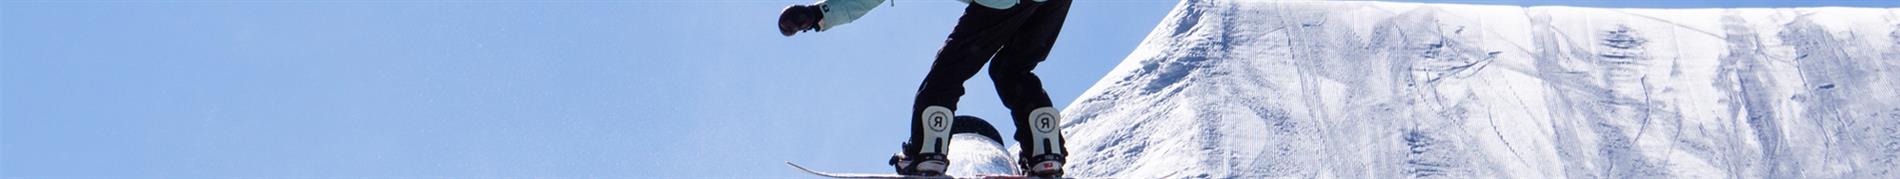 Volcom Women's Snowboard Pants: Warm, Waterproof and Awesome 